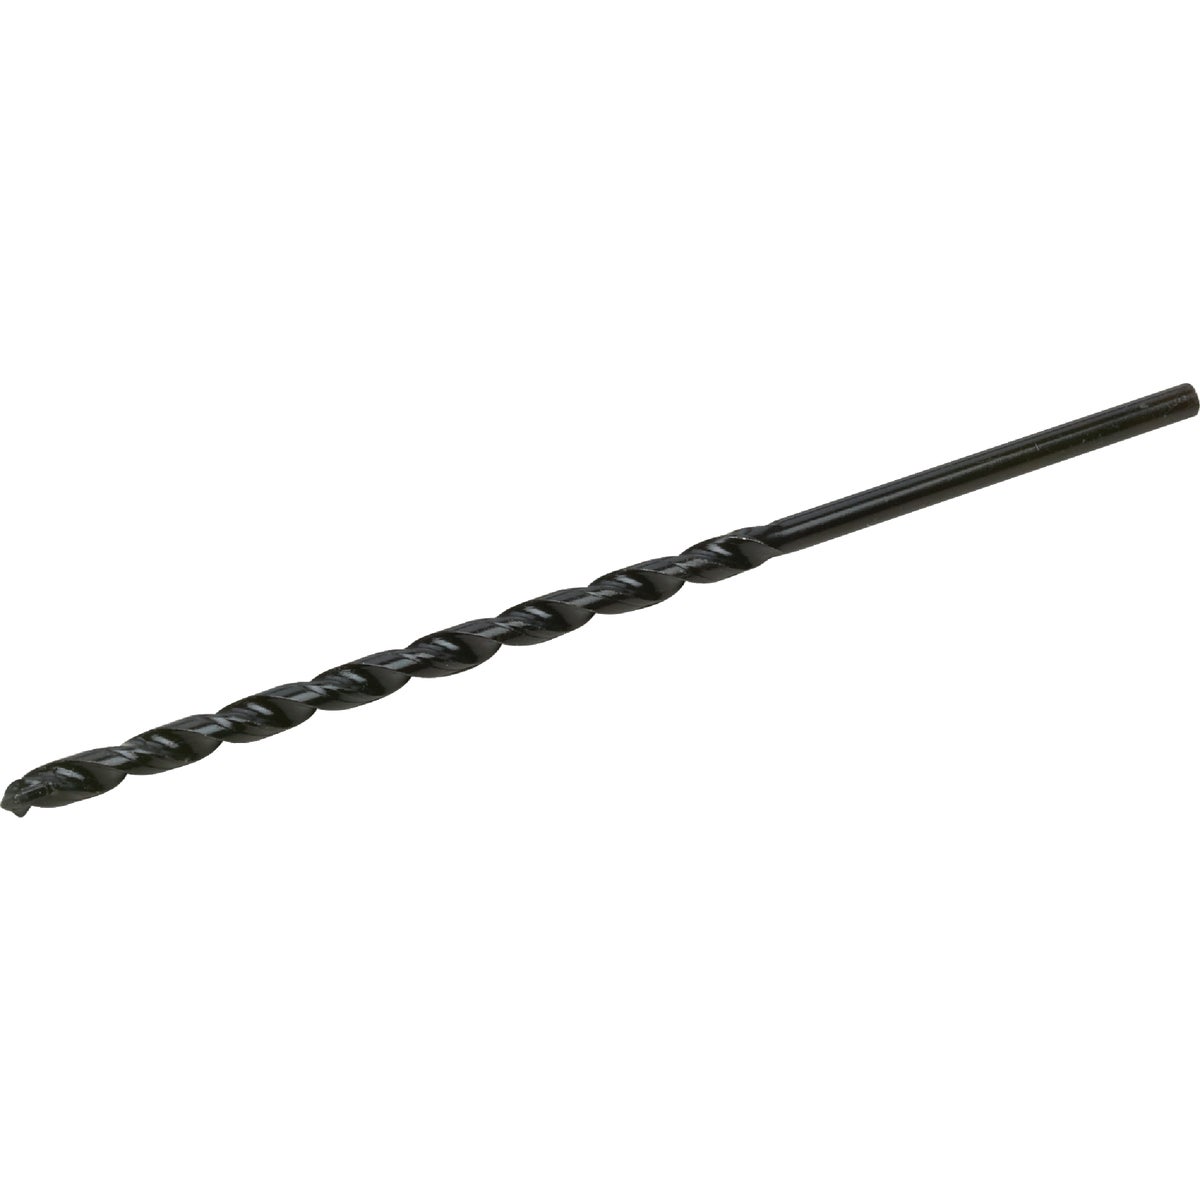 Item 766569, Carbide tipped tapcon drill bit delivers strength for drilling into tough 